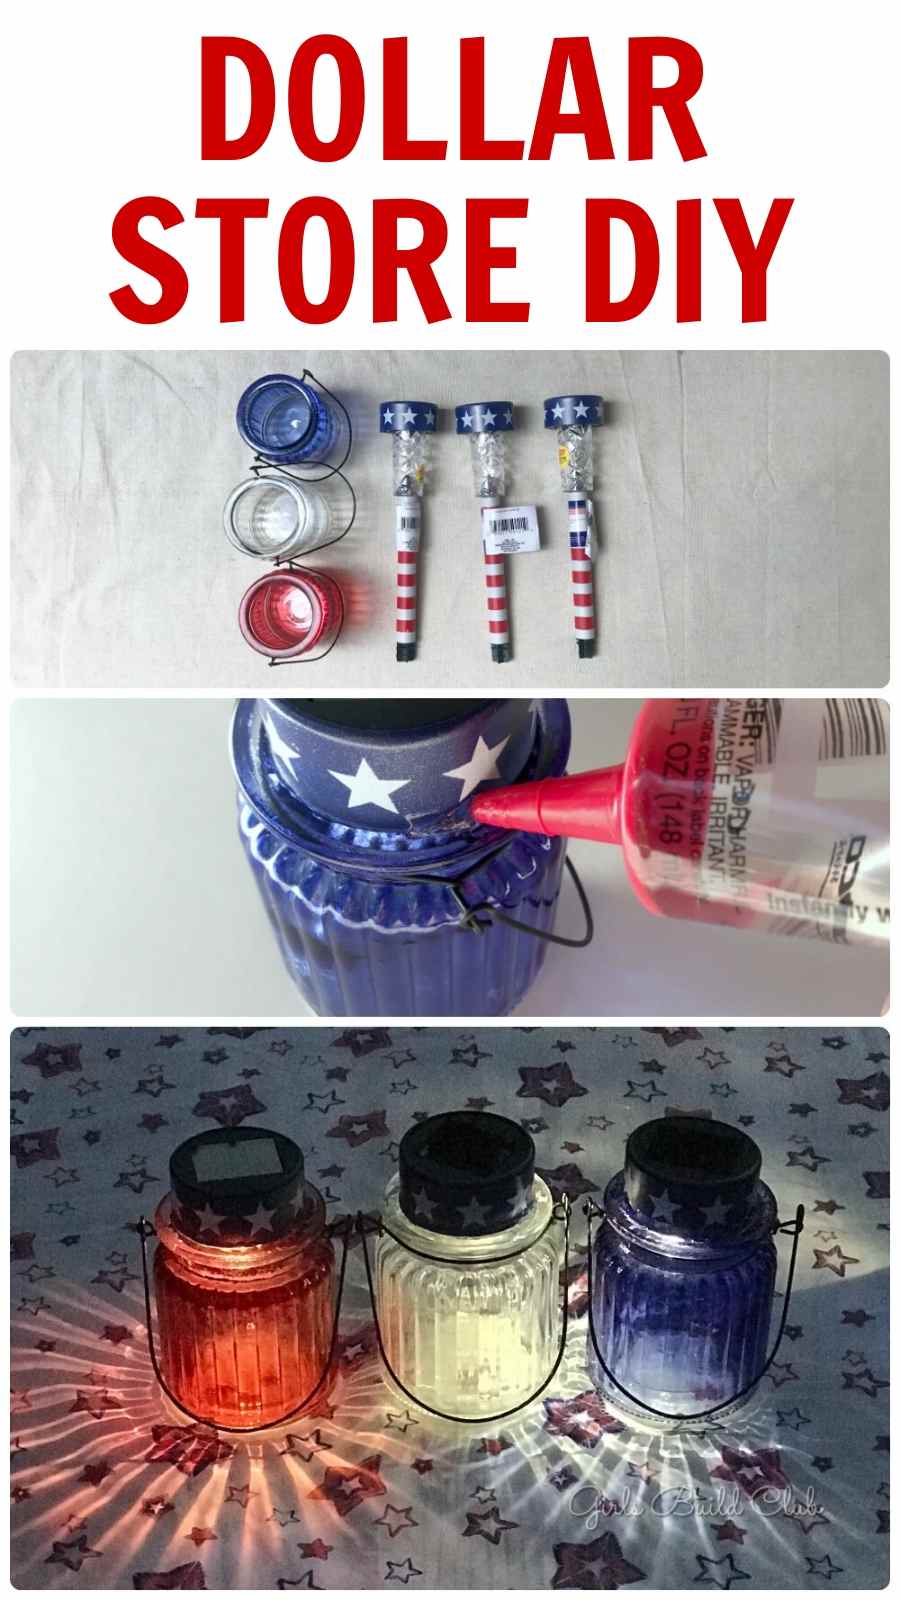 Dollar Store DIY for 4th of July Decor